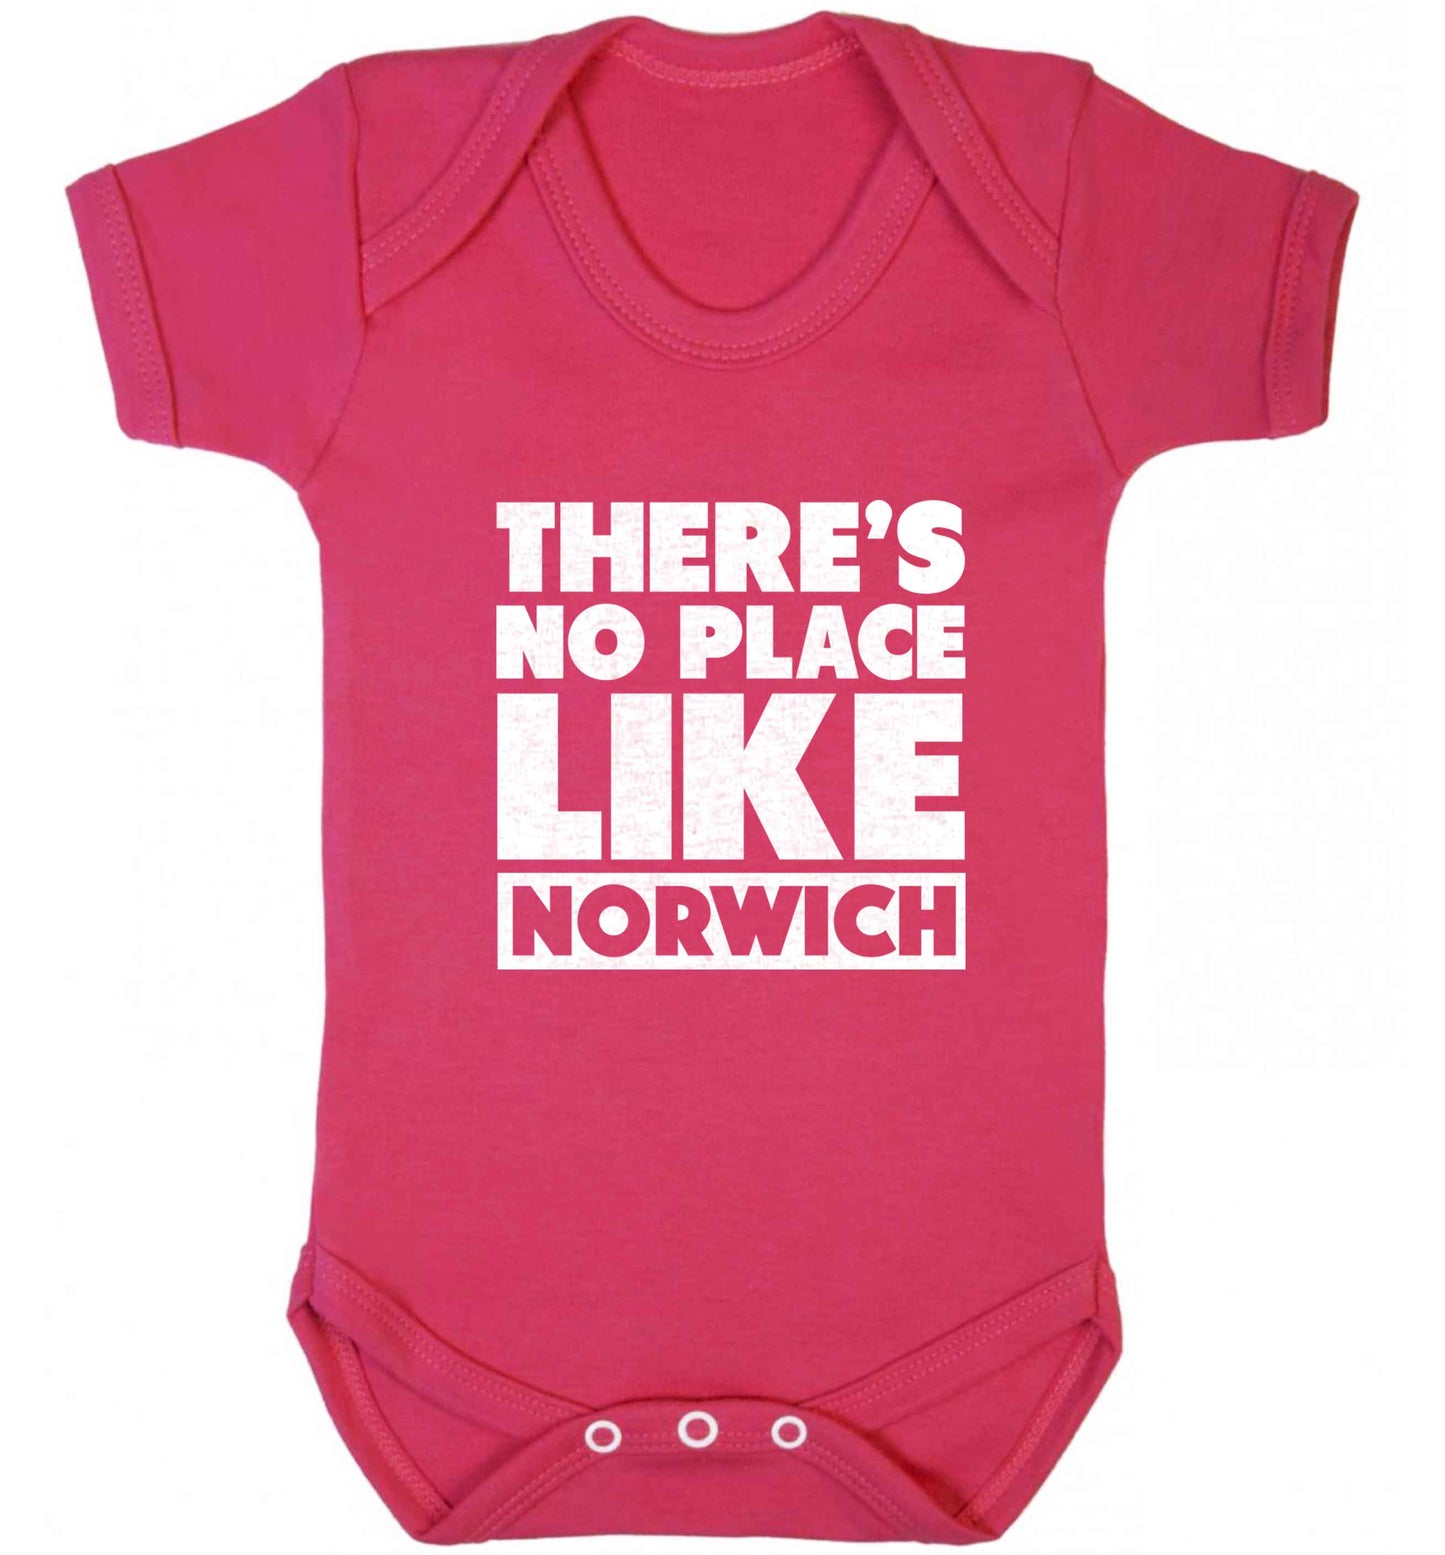 There's no place like Norwich baby vest dark pink 18-24 months